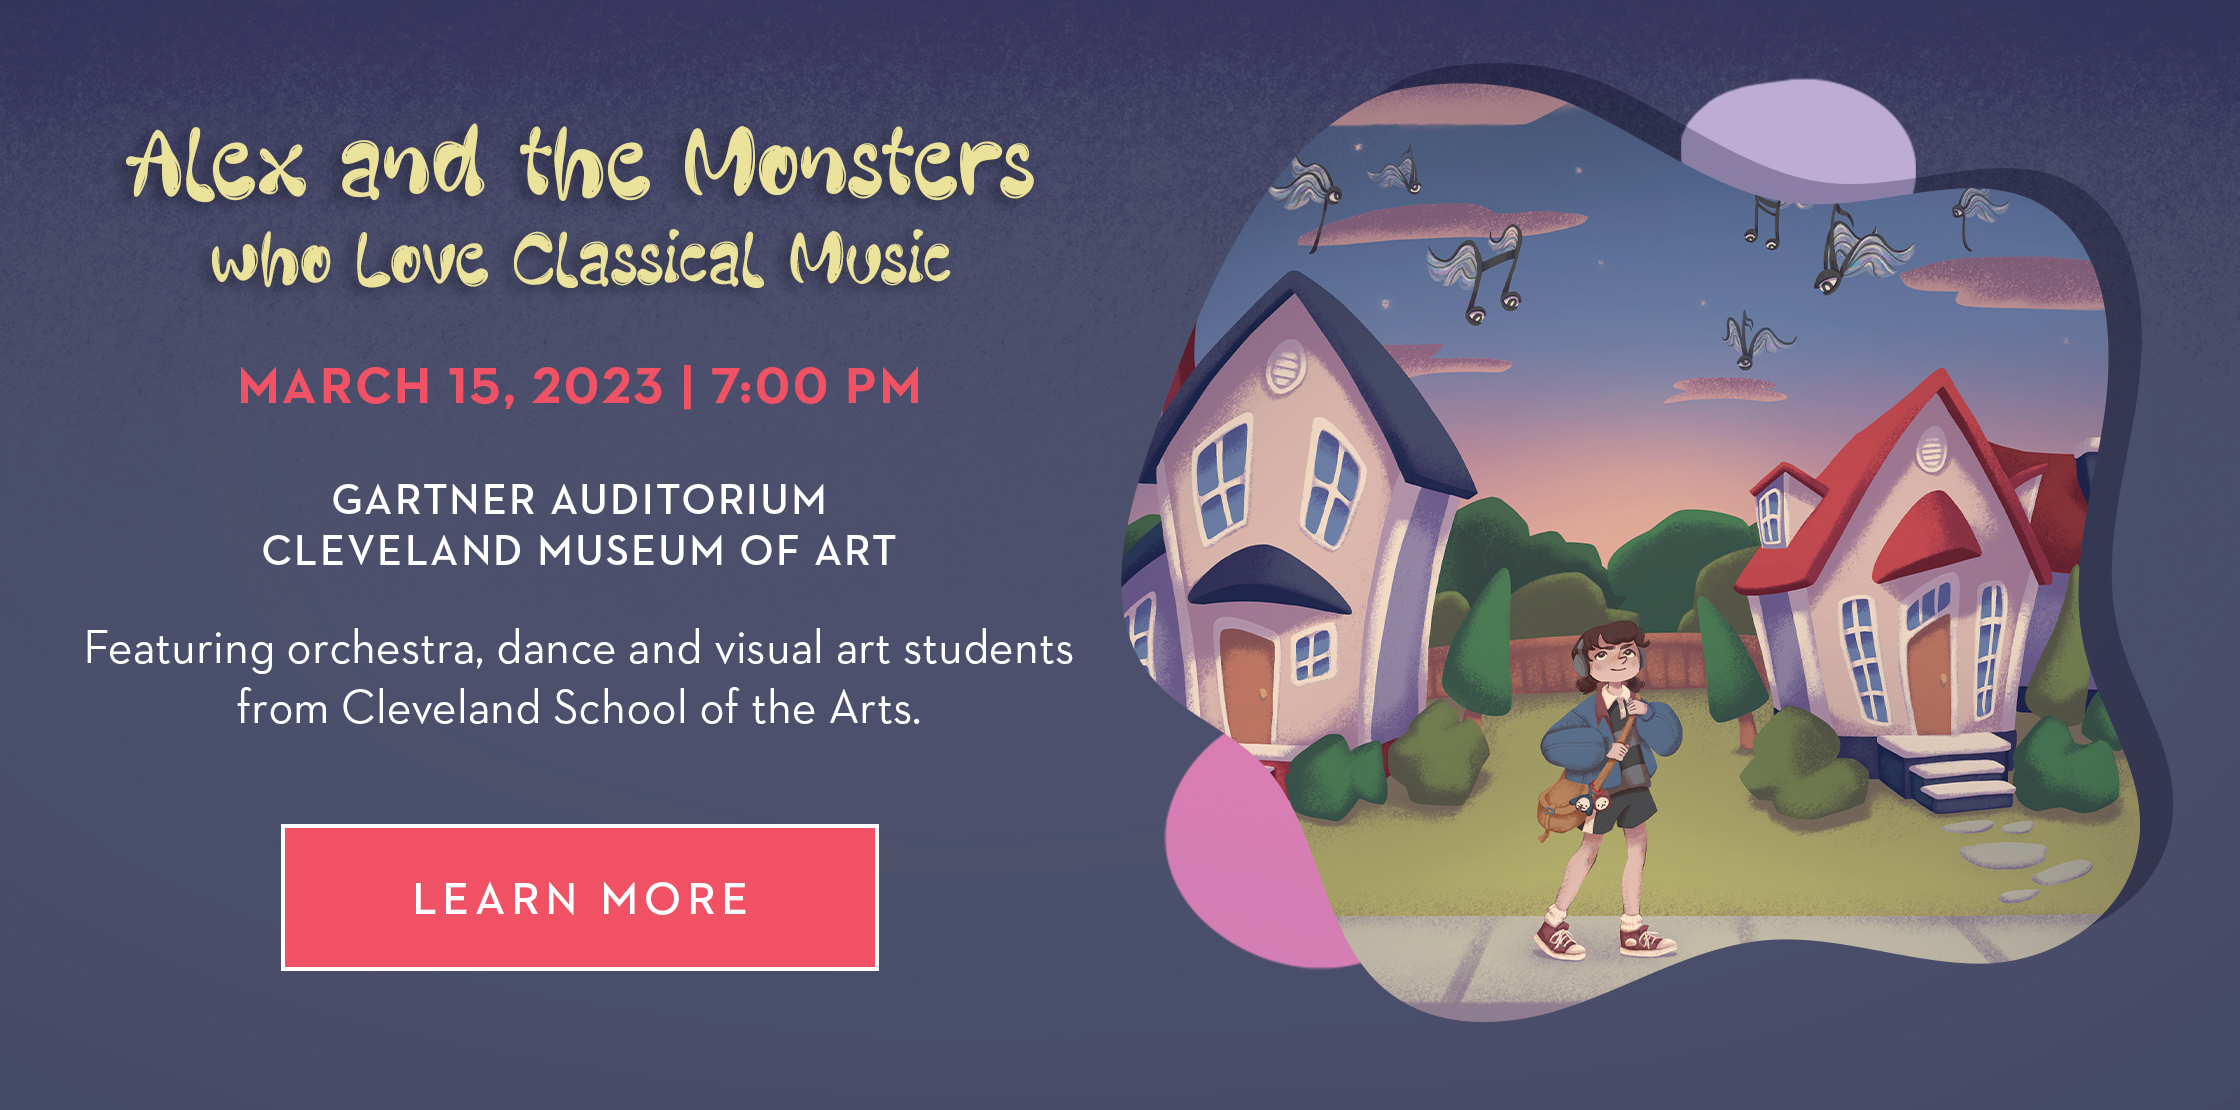 Alex and the Monsters who Love Cassical Music, March 15, 2023, 7:00 PM